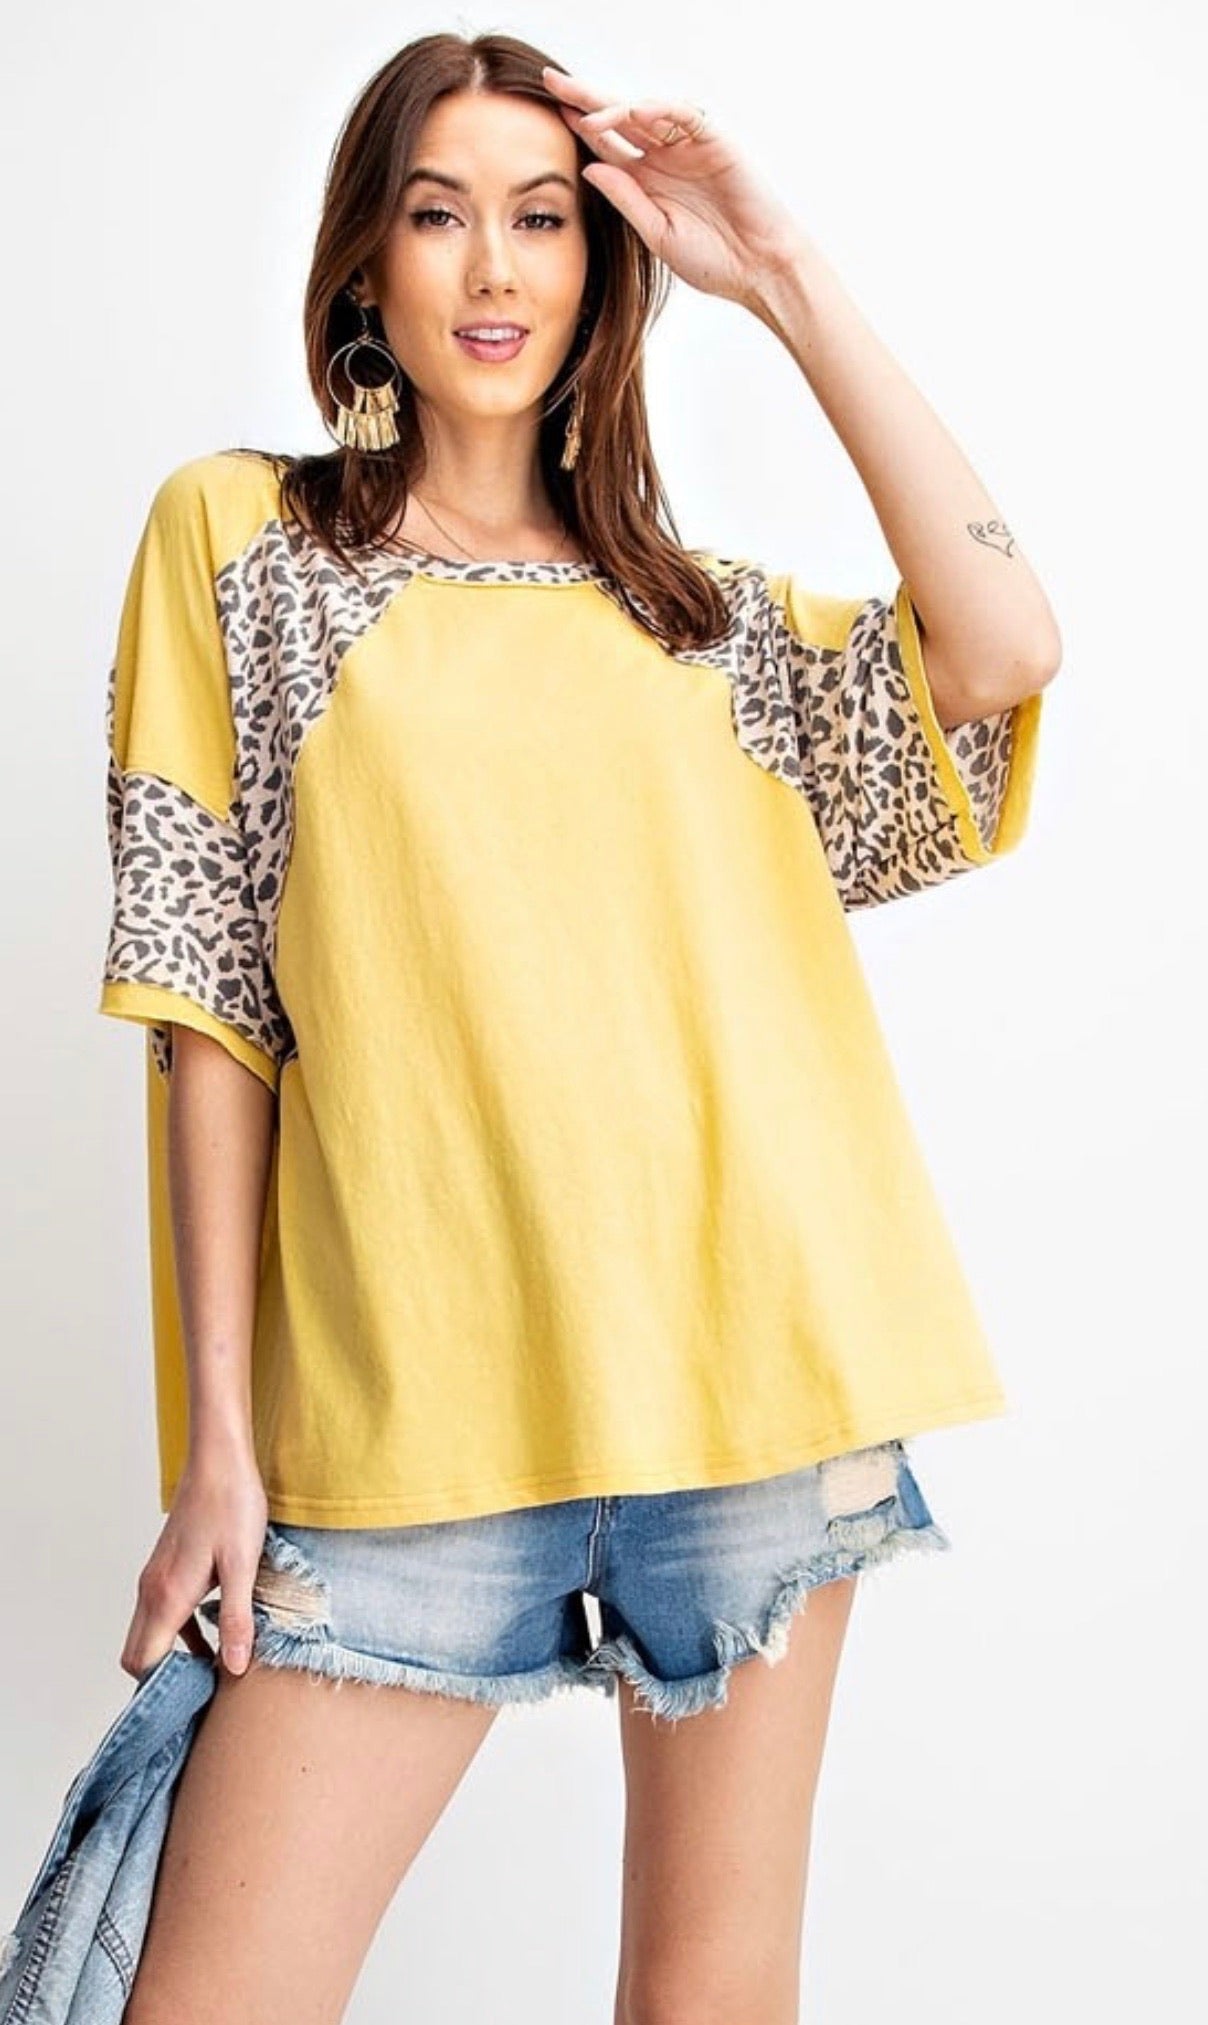 SYDNEY ANIMAL PRINT LOOSE FIT TOP - Corinne an Affordable Women's Clothing Boutique in the US USA